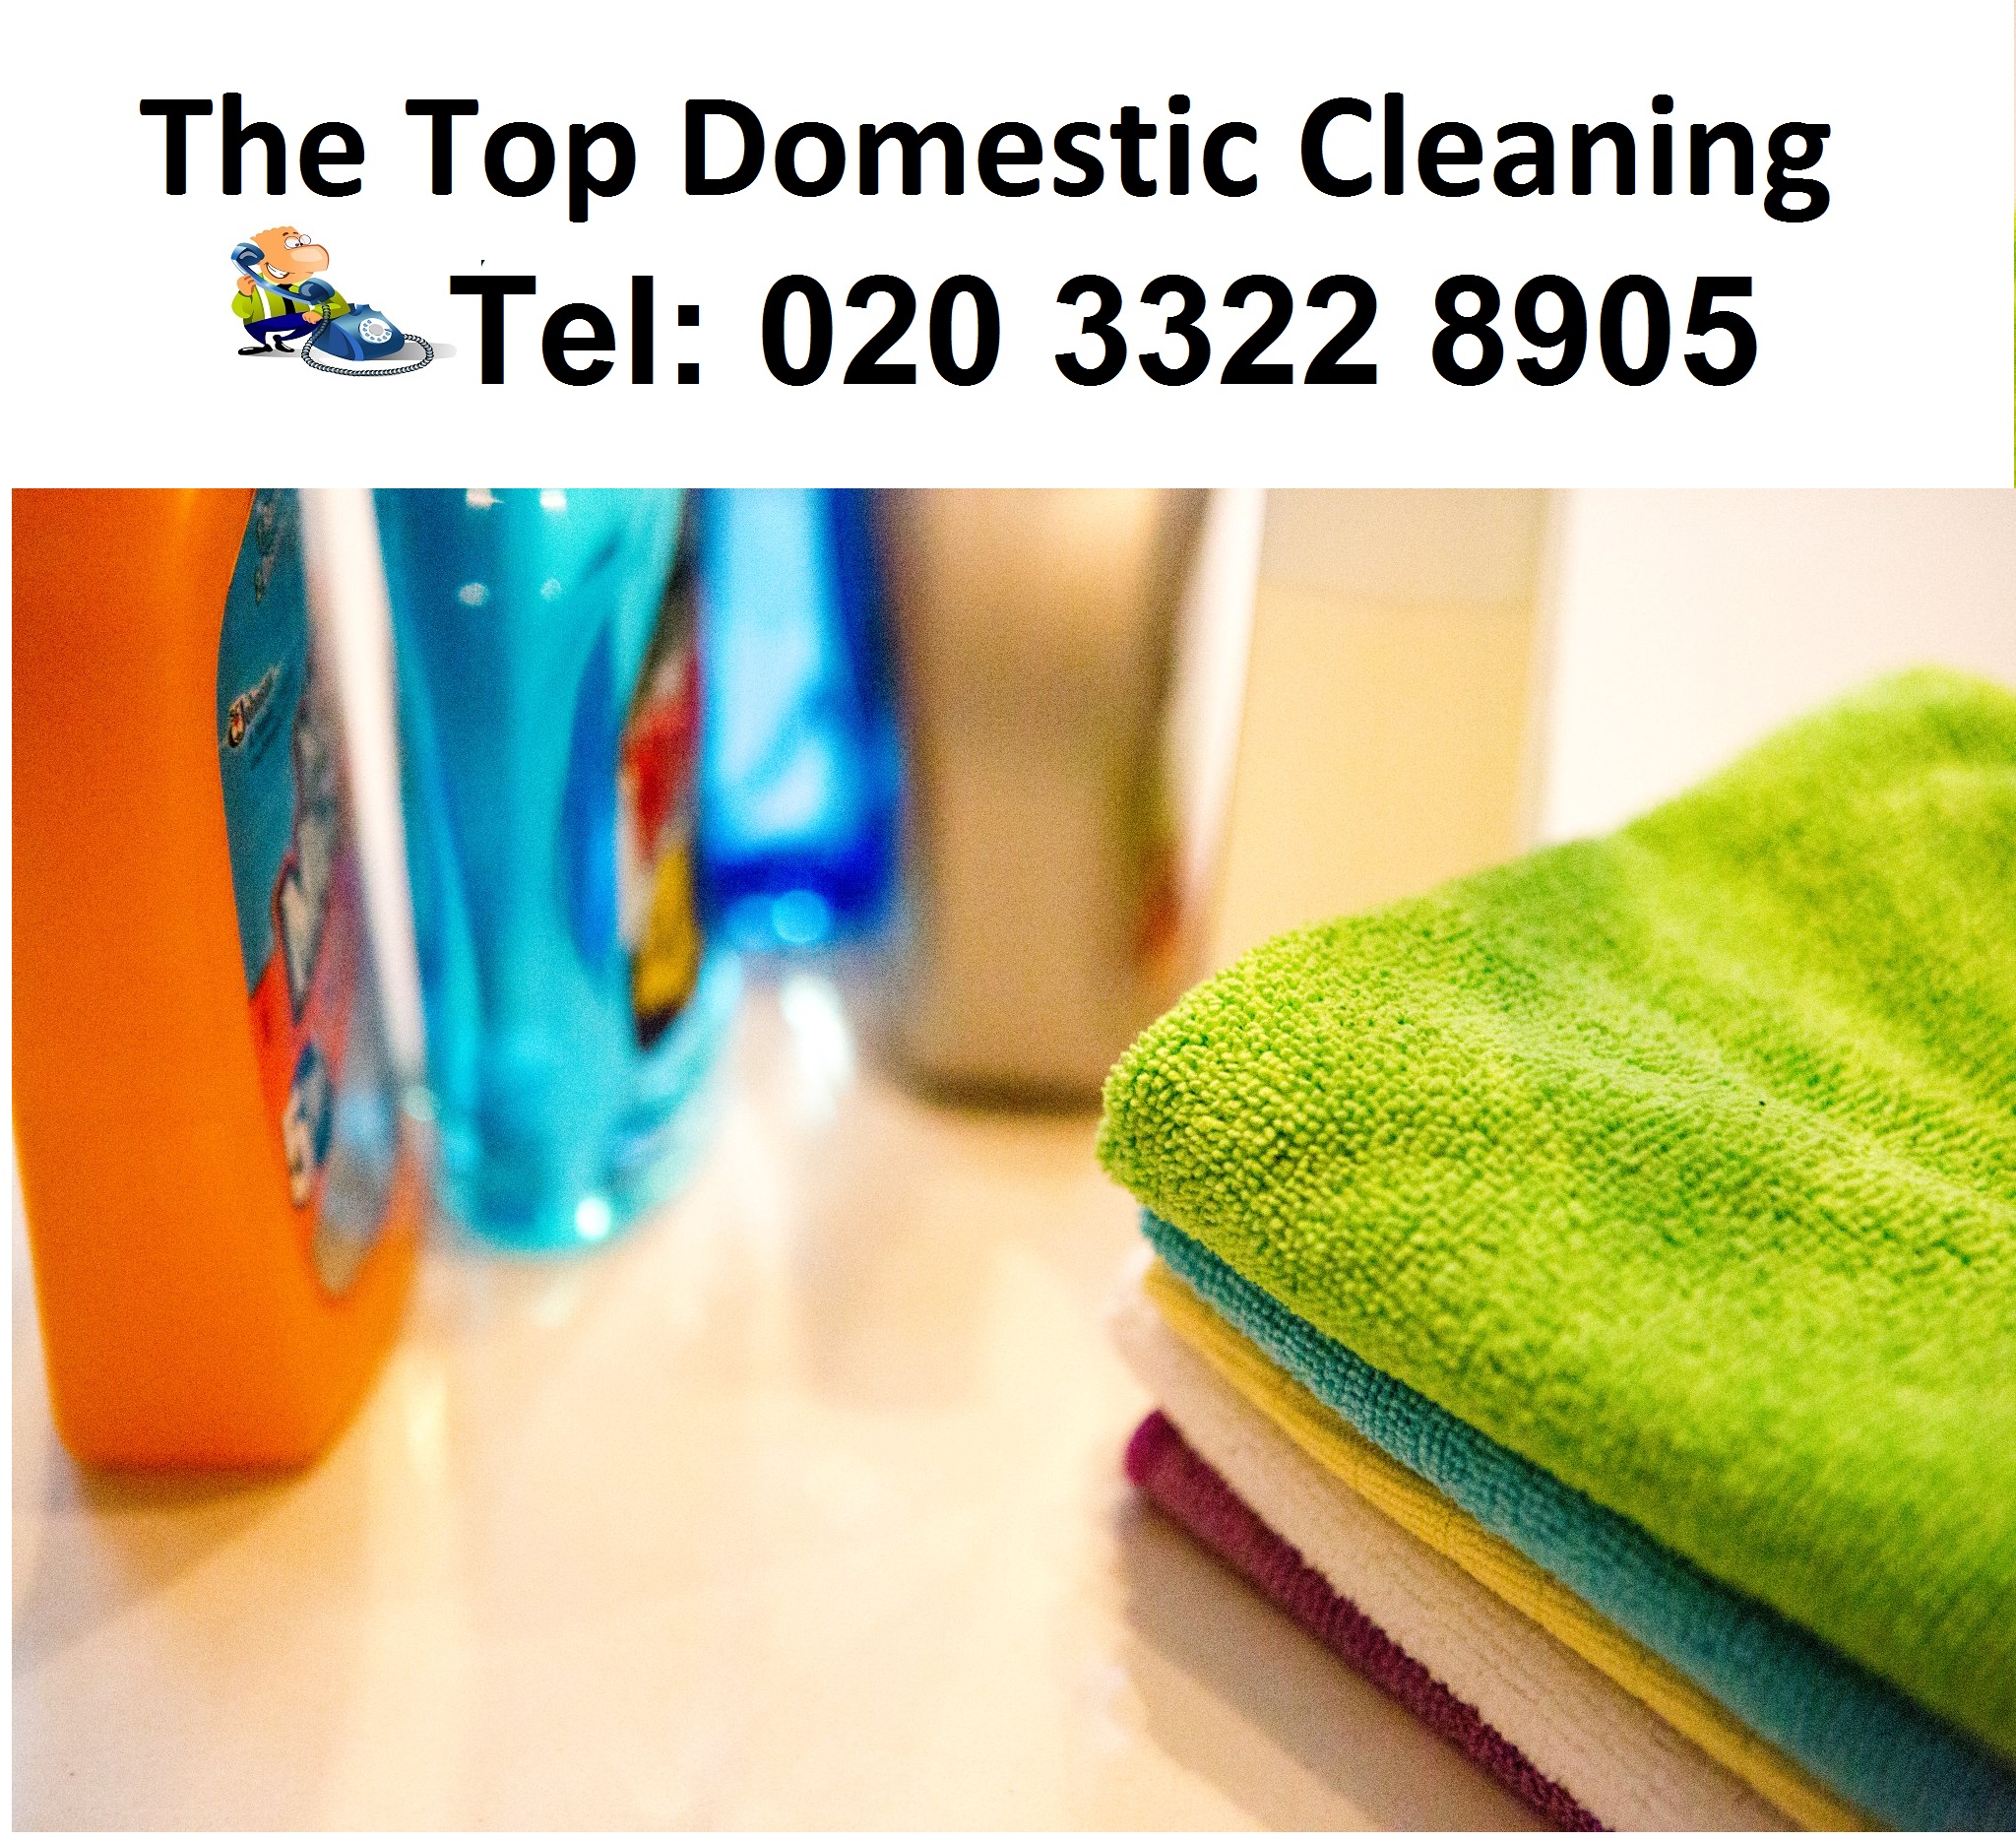 How to get the most affordable Domestic Cleaning London service